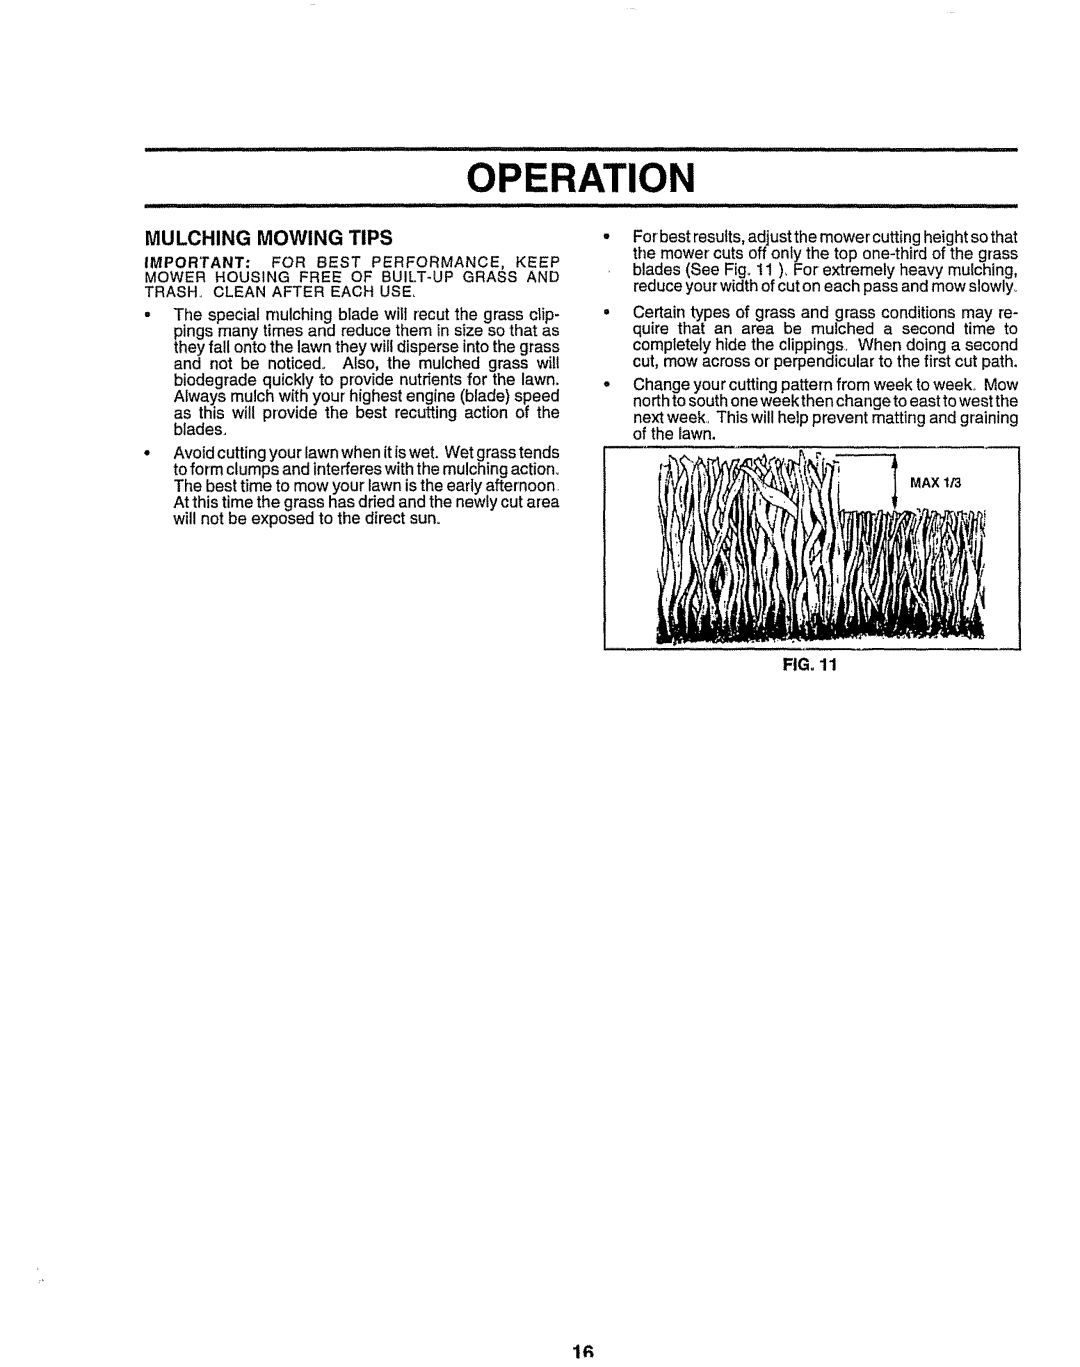 Sears 917.258473 owner manual Operation, Mulching Mowing Tips 